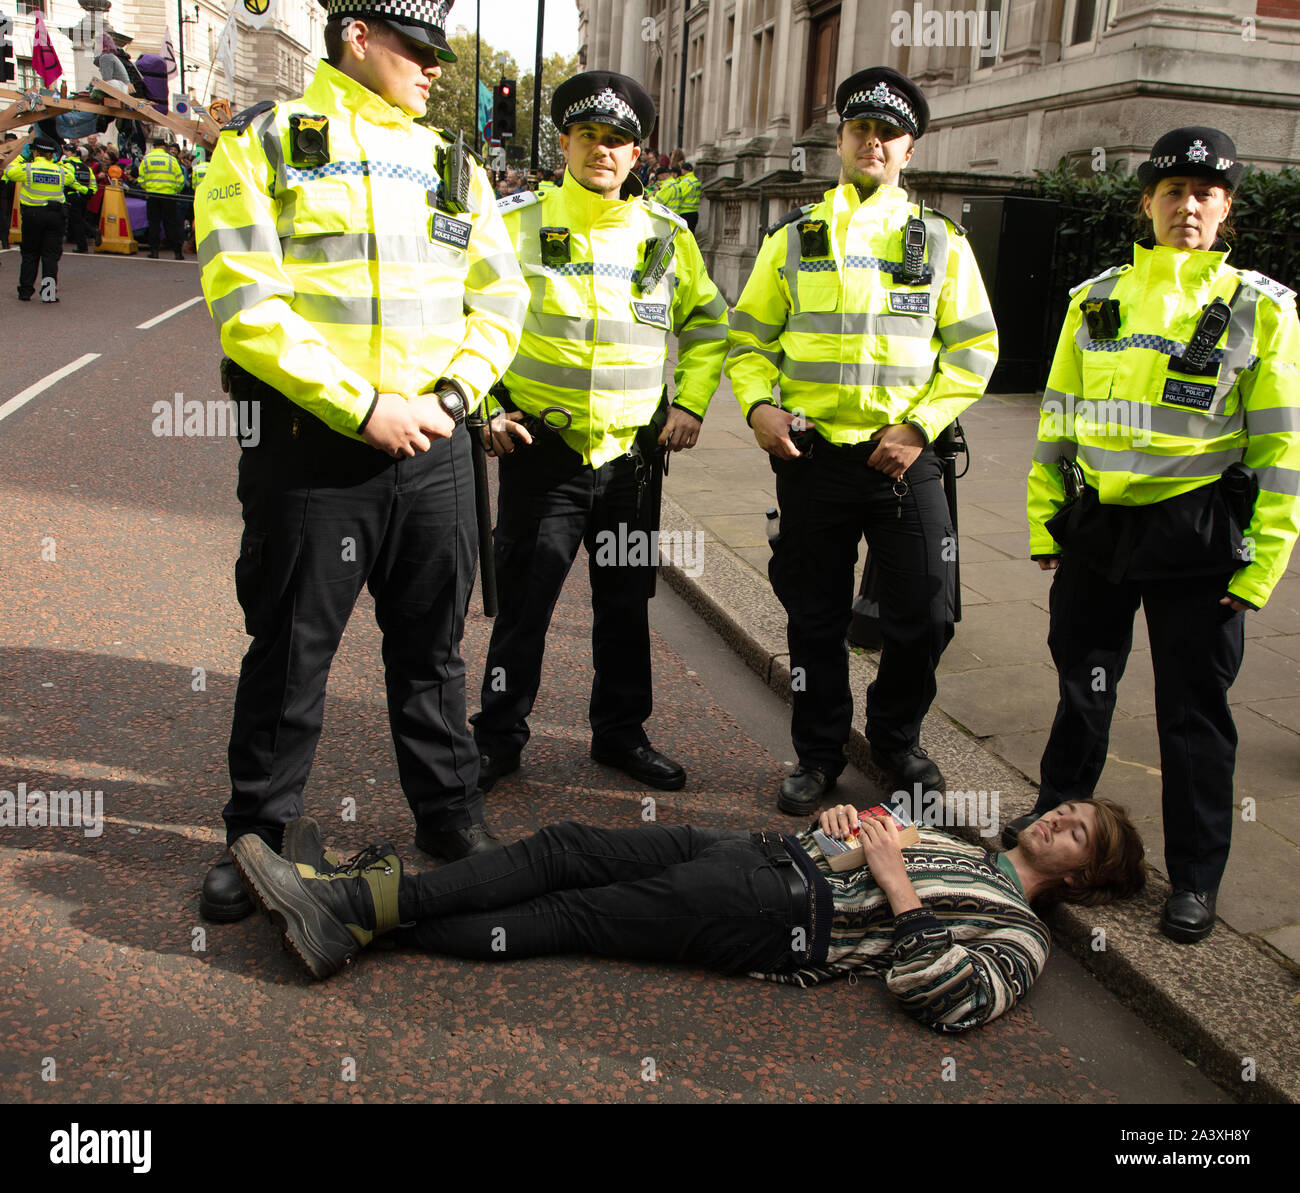 London, UK. 9th October 2019. Police arrest a protester in Birdcage Walk, Westminster, during the Extinction Rebellion two week long protest in London. Credit: Joe Kuis / Alamy News Stock Photo